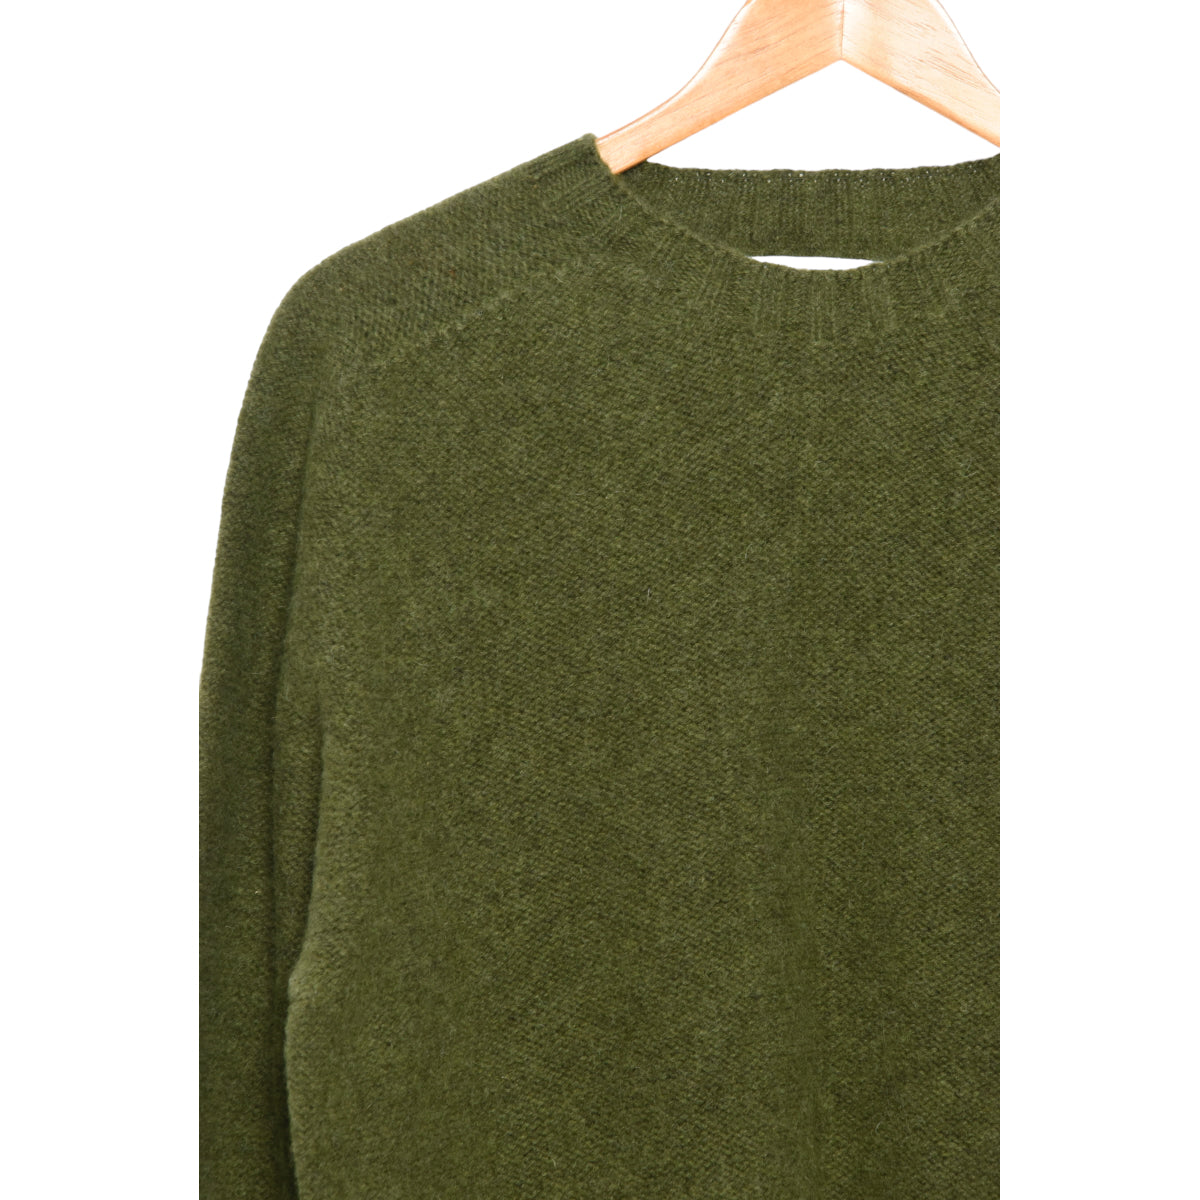 Universal Works Seamless Crew 29951 Supersoft Knit green